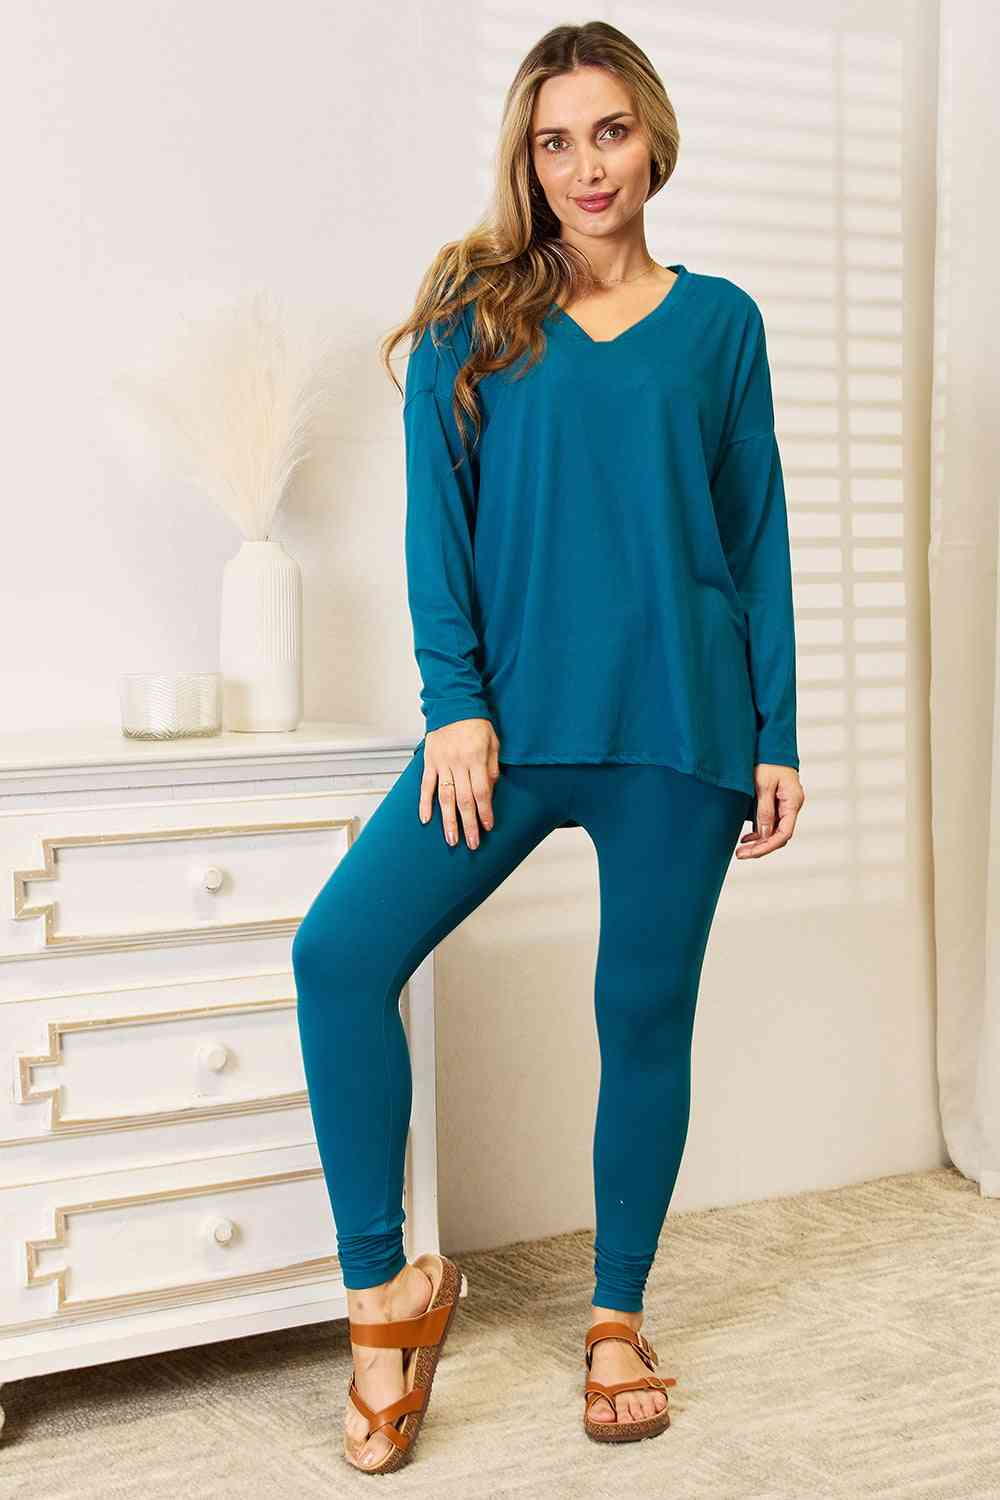 Lazy Days Top and Leggings Set